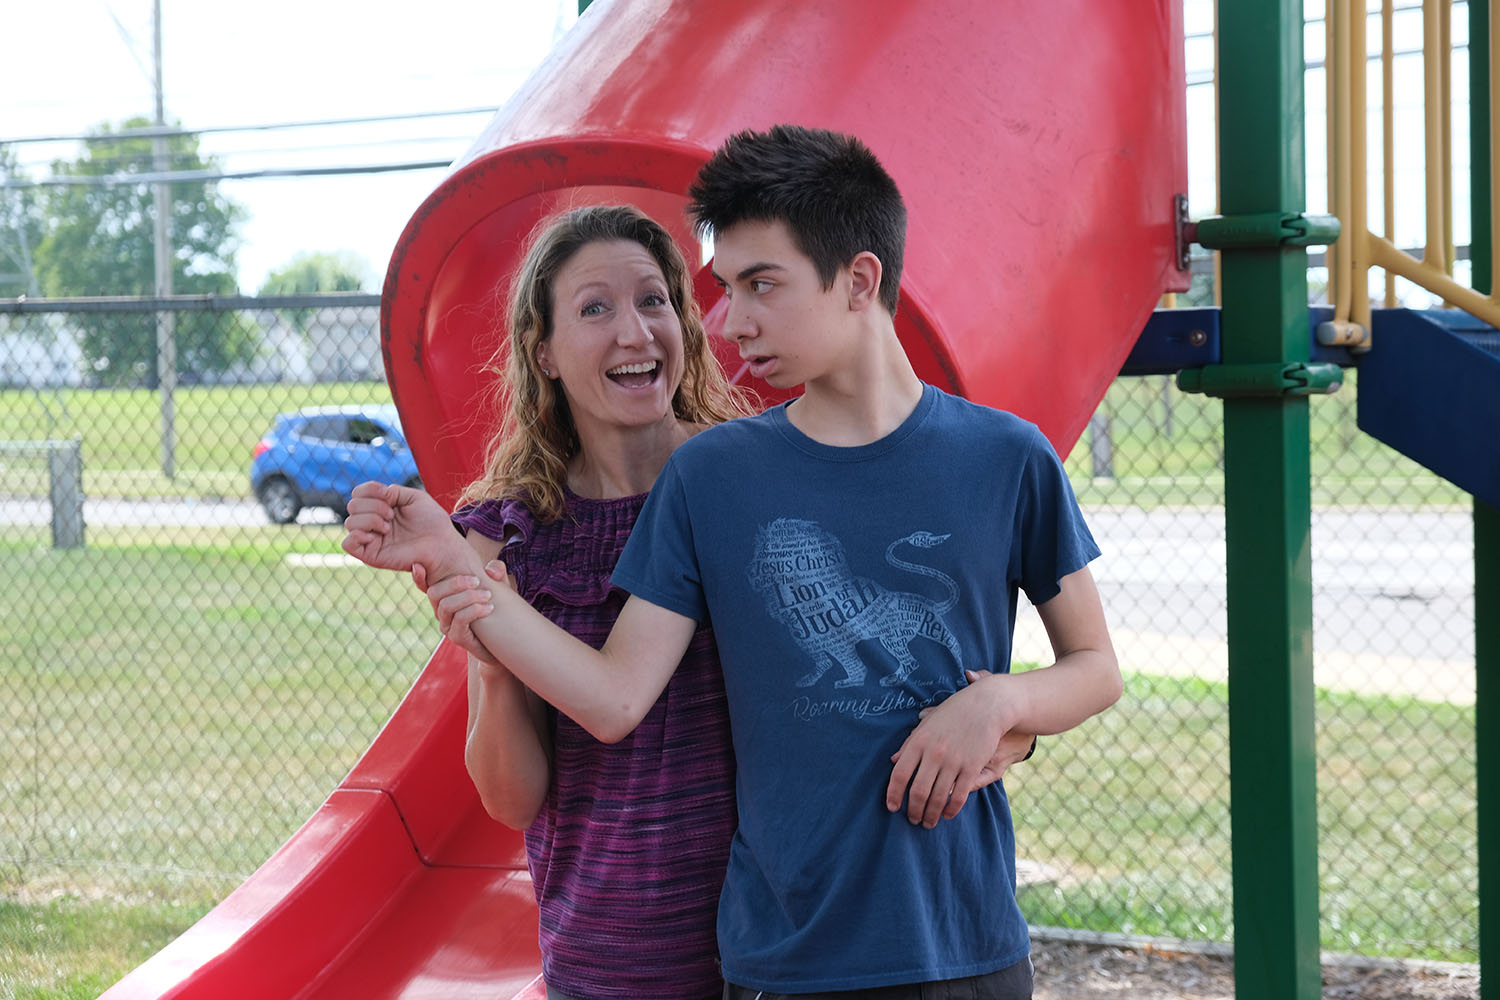 Woman and boy on playground